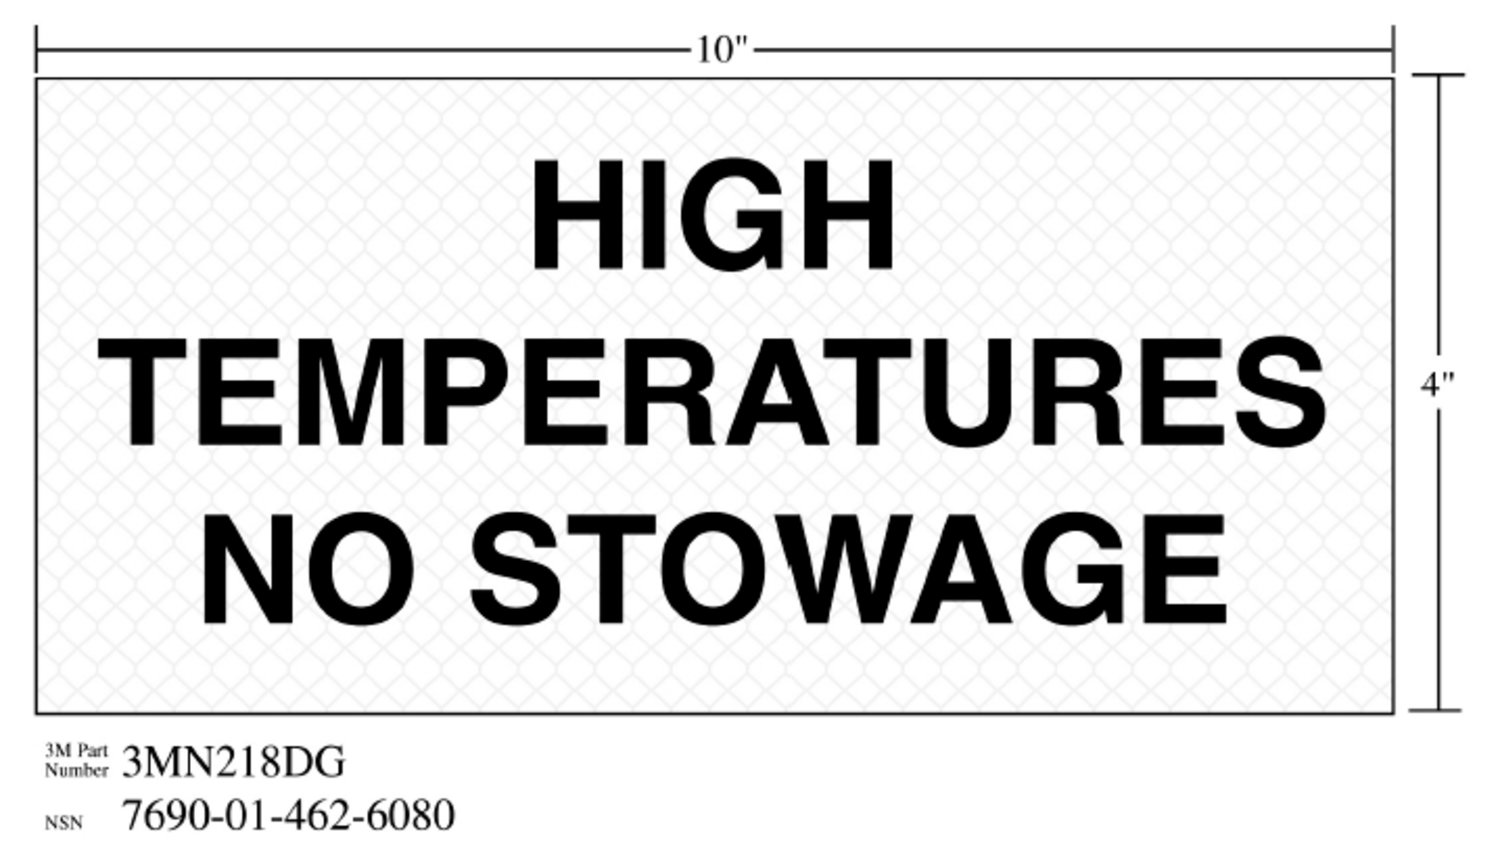 7010317786 - 3M Diamond Grade Safety Sign 3MN218DG, "HIGH…STOWAGE", 10 in x 4 in,
10/Package